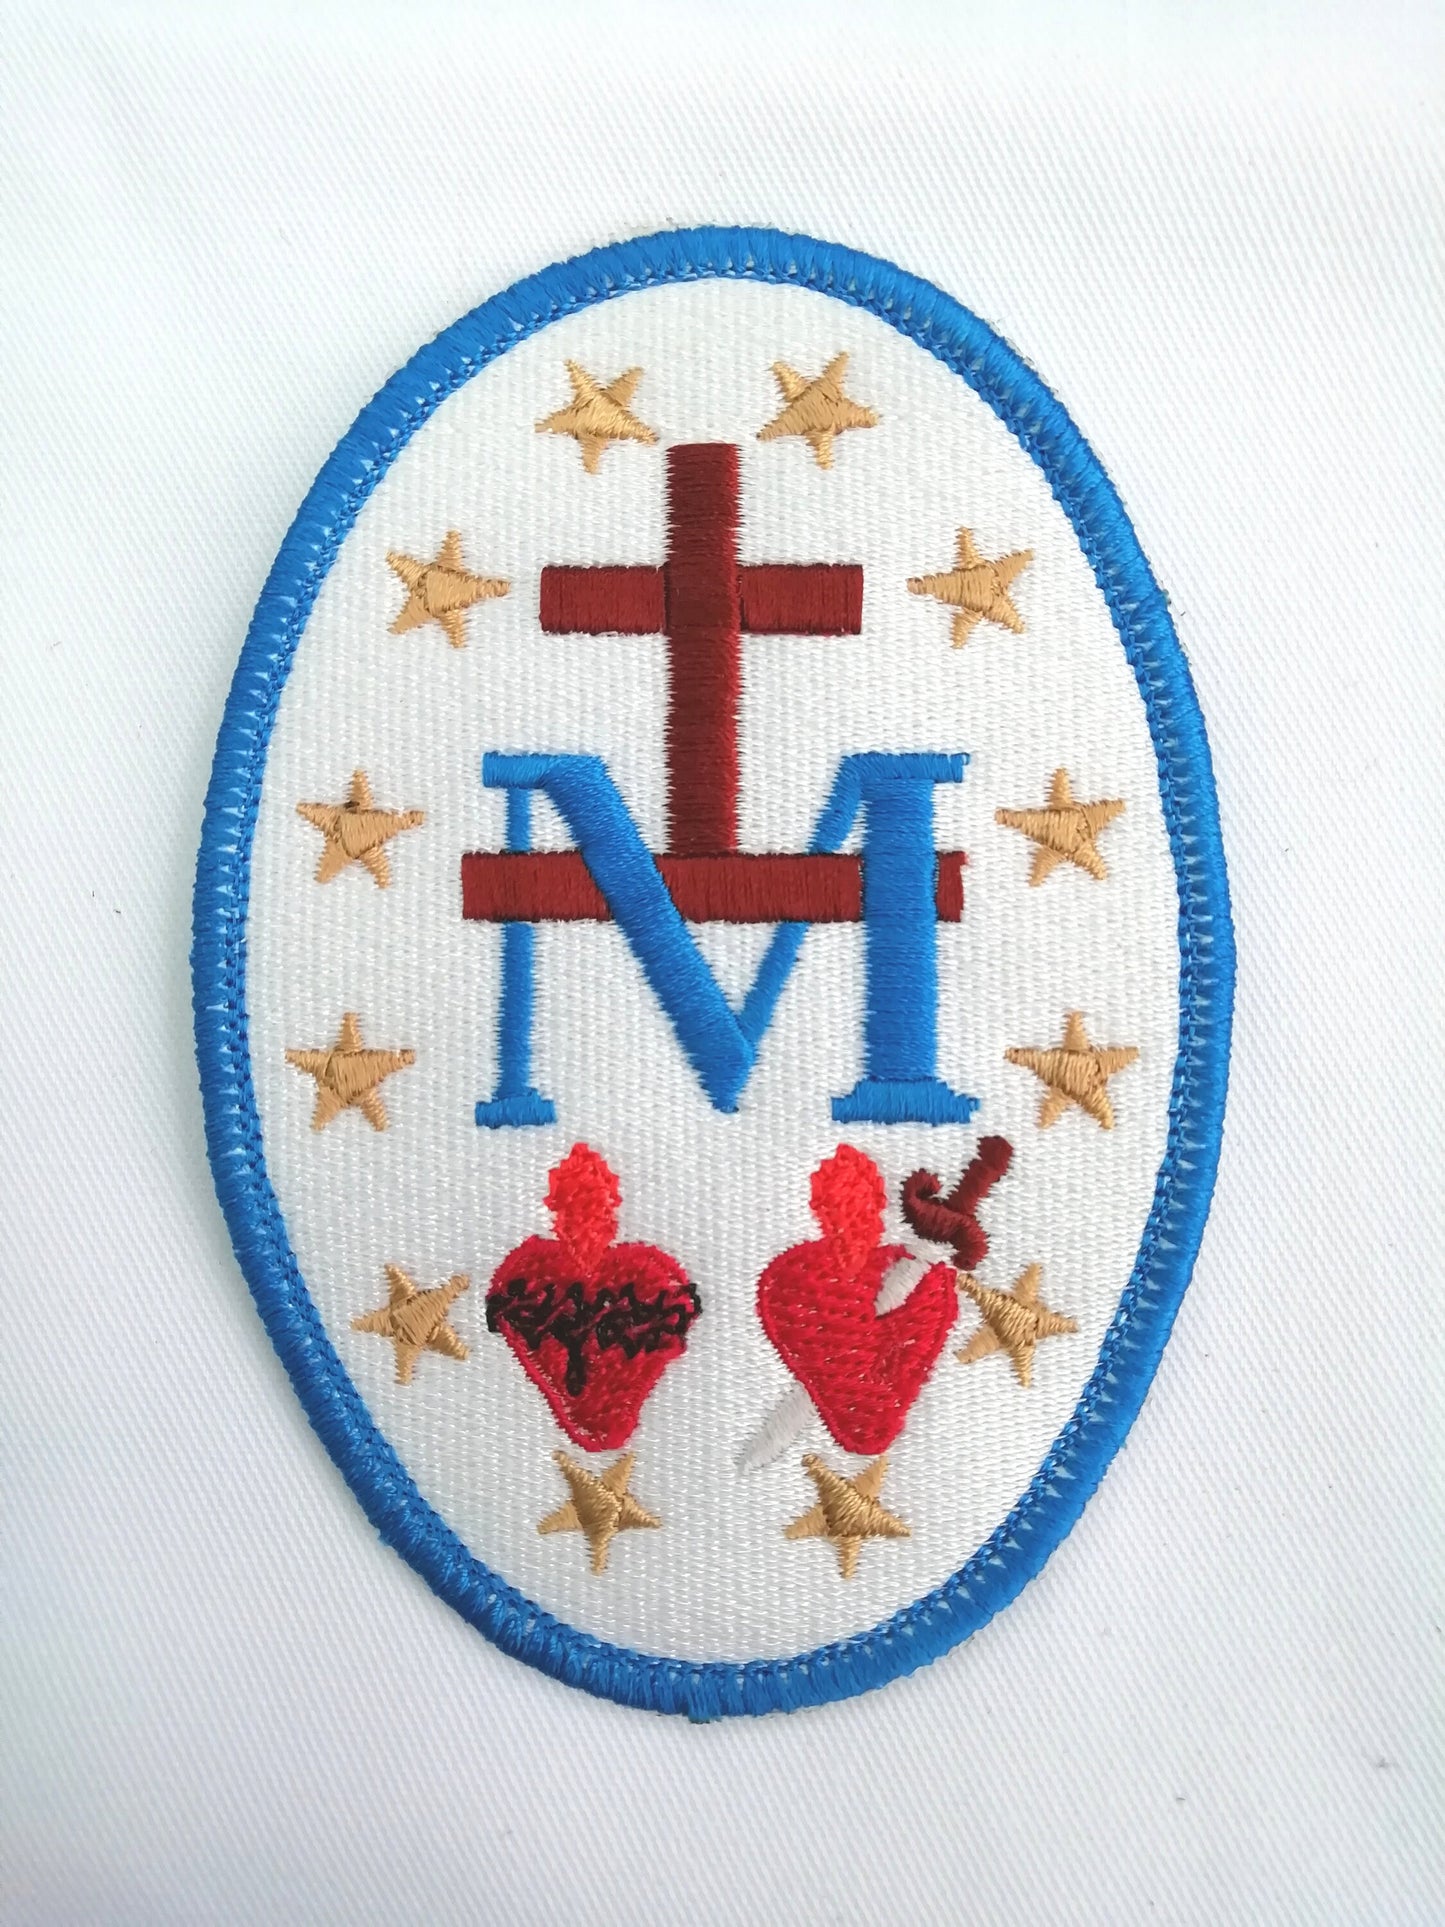 Miraculous Medal badge, catholic patch, embroidered patch, catholic gift, religious gift, Our Lady, Scared Heart, Immaculate, pilgrim